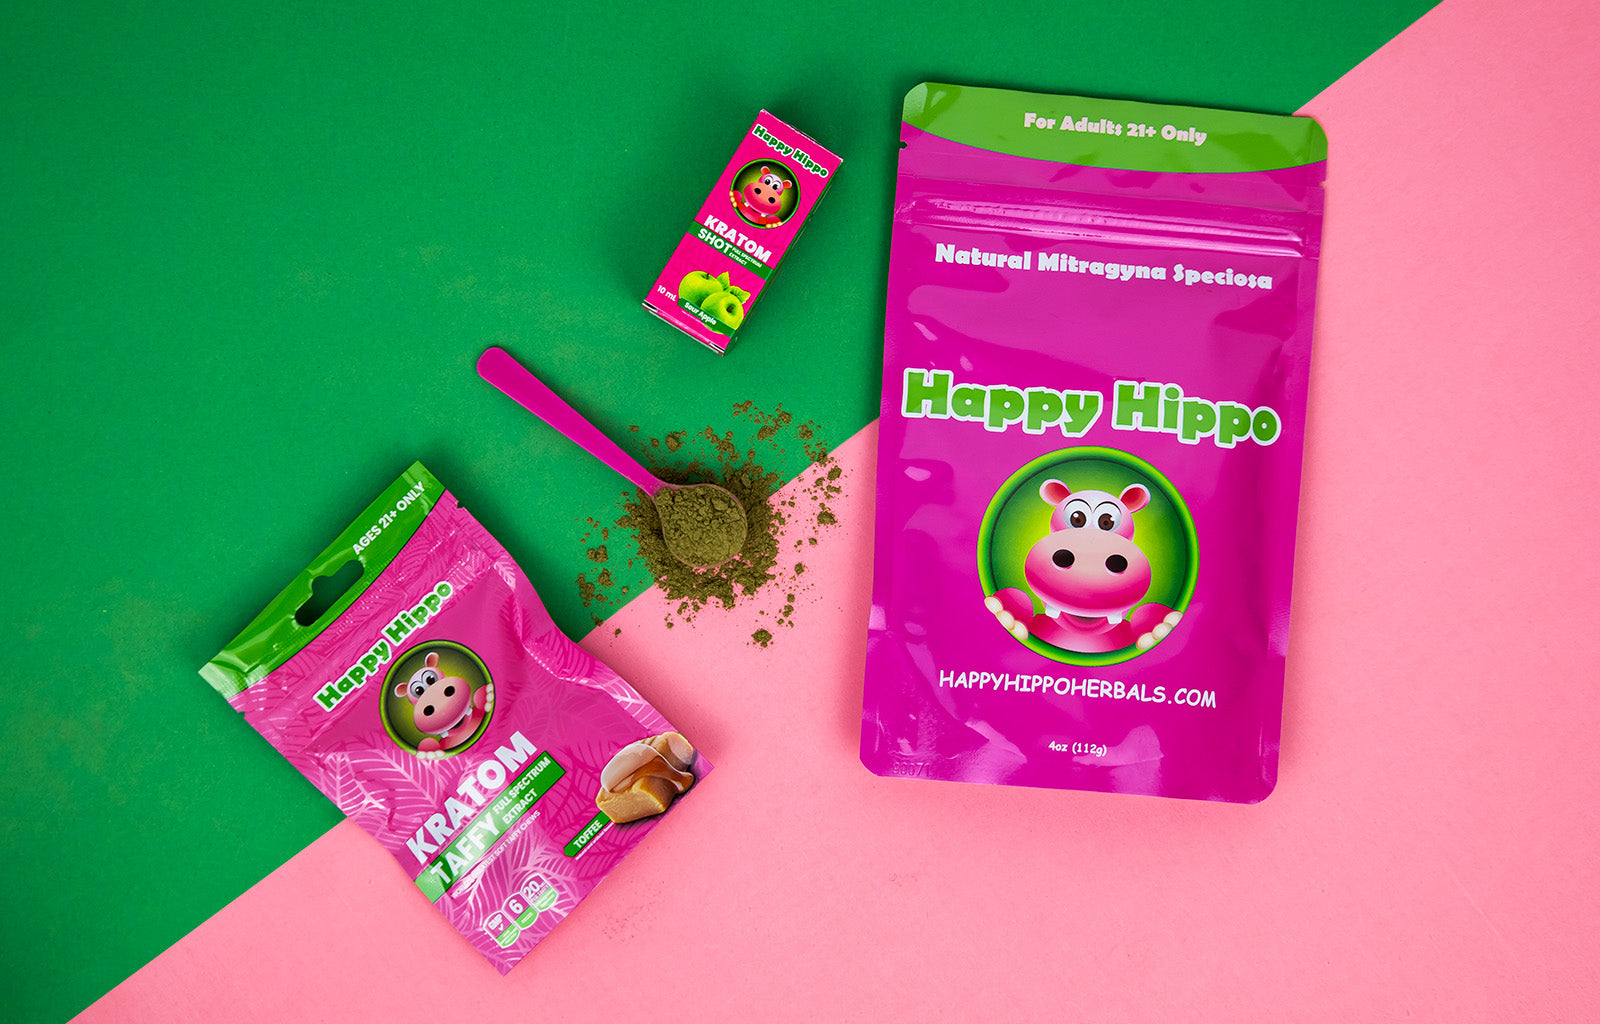 Featured image depicting an array of Happy Hippo brand kratom products, including two packets of kratom powder for making kratom tea, and a (Sour Apple flavored) Liquid Kratom Energy Shot.